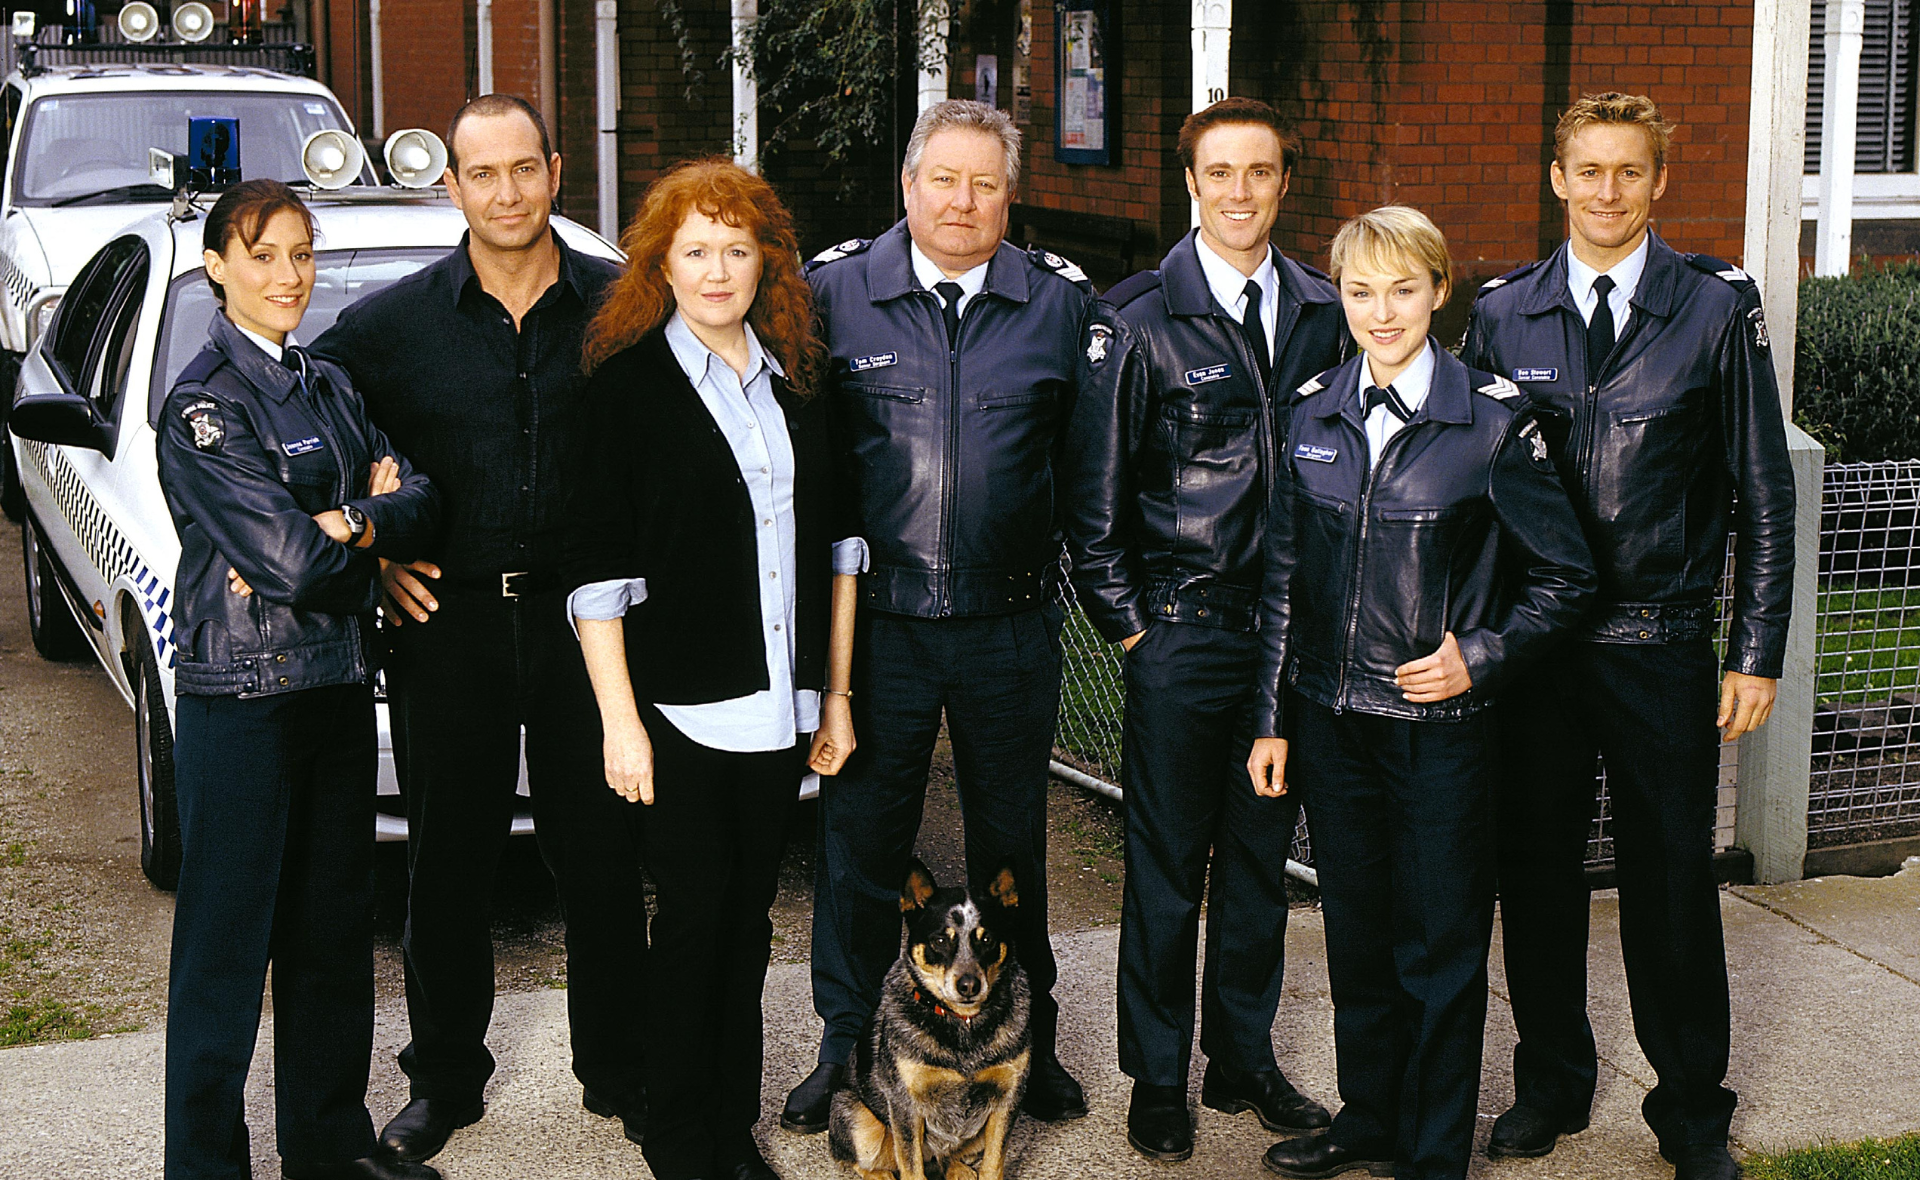 On the 30th anniversary of Blue Heelers’ premiere, we celebrate the cop show that became a phenomenon